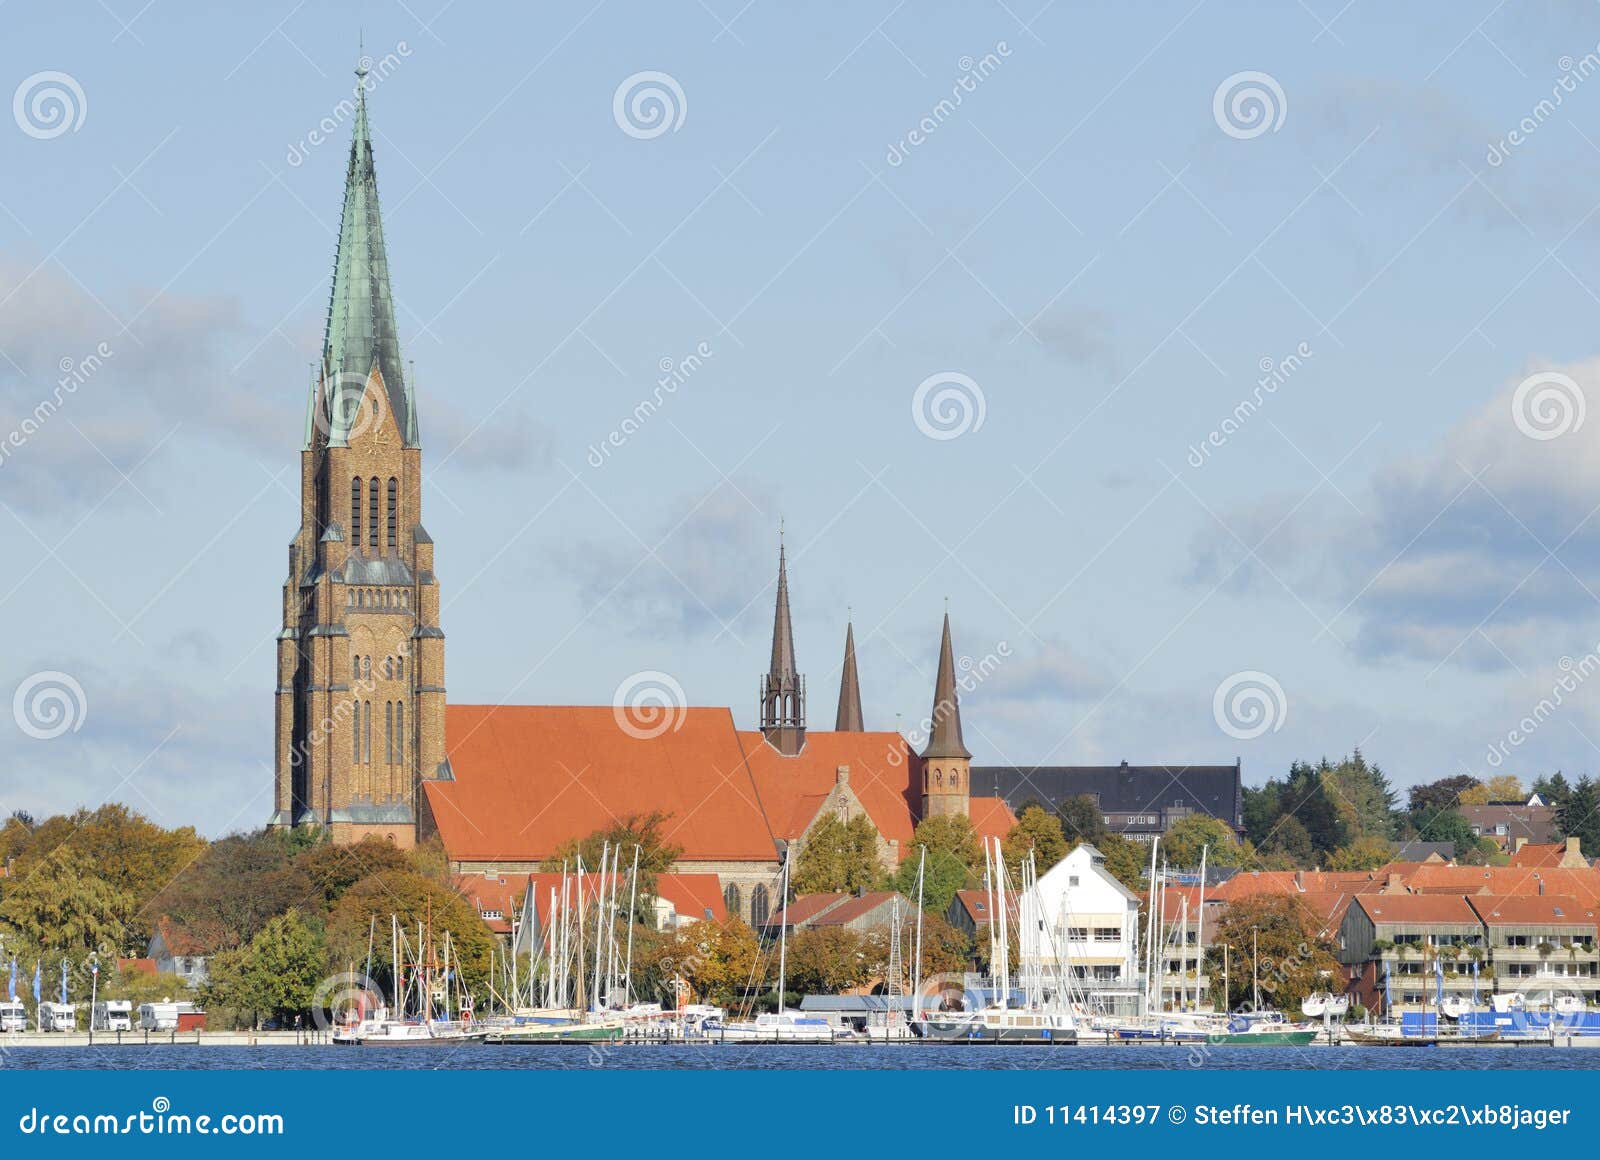 the schleswig cathedral